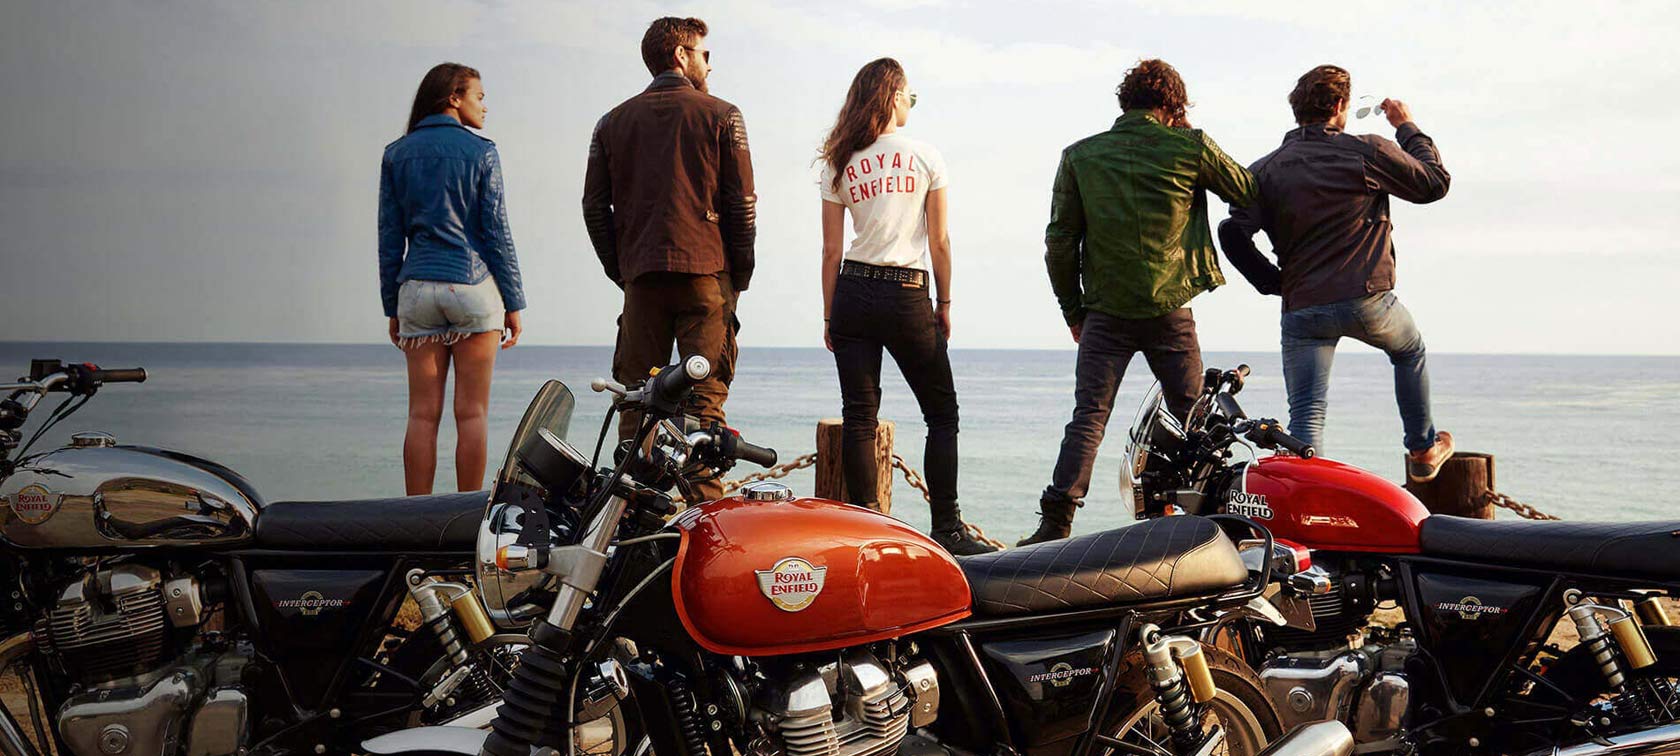 group of rifers with their Royal Enfield bikes near a beach at sunset